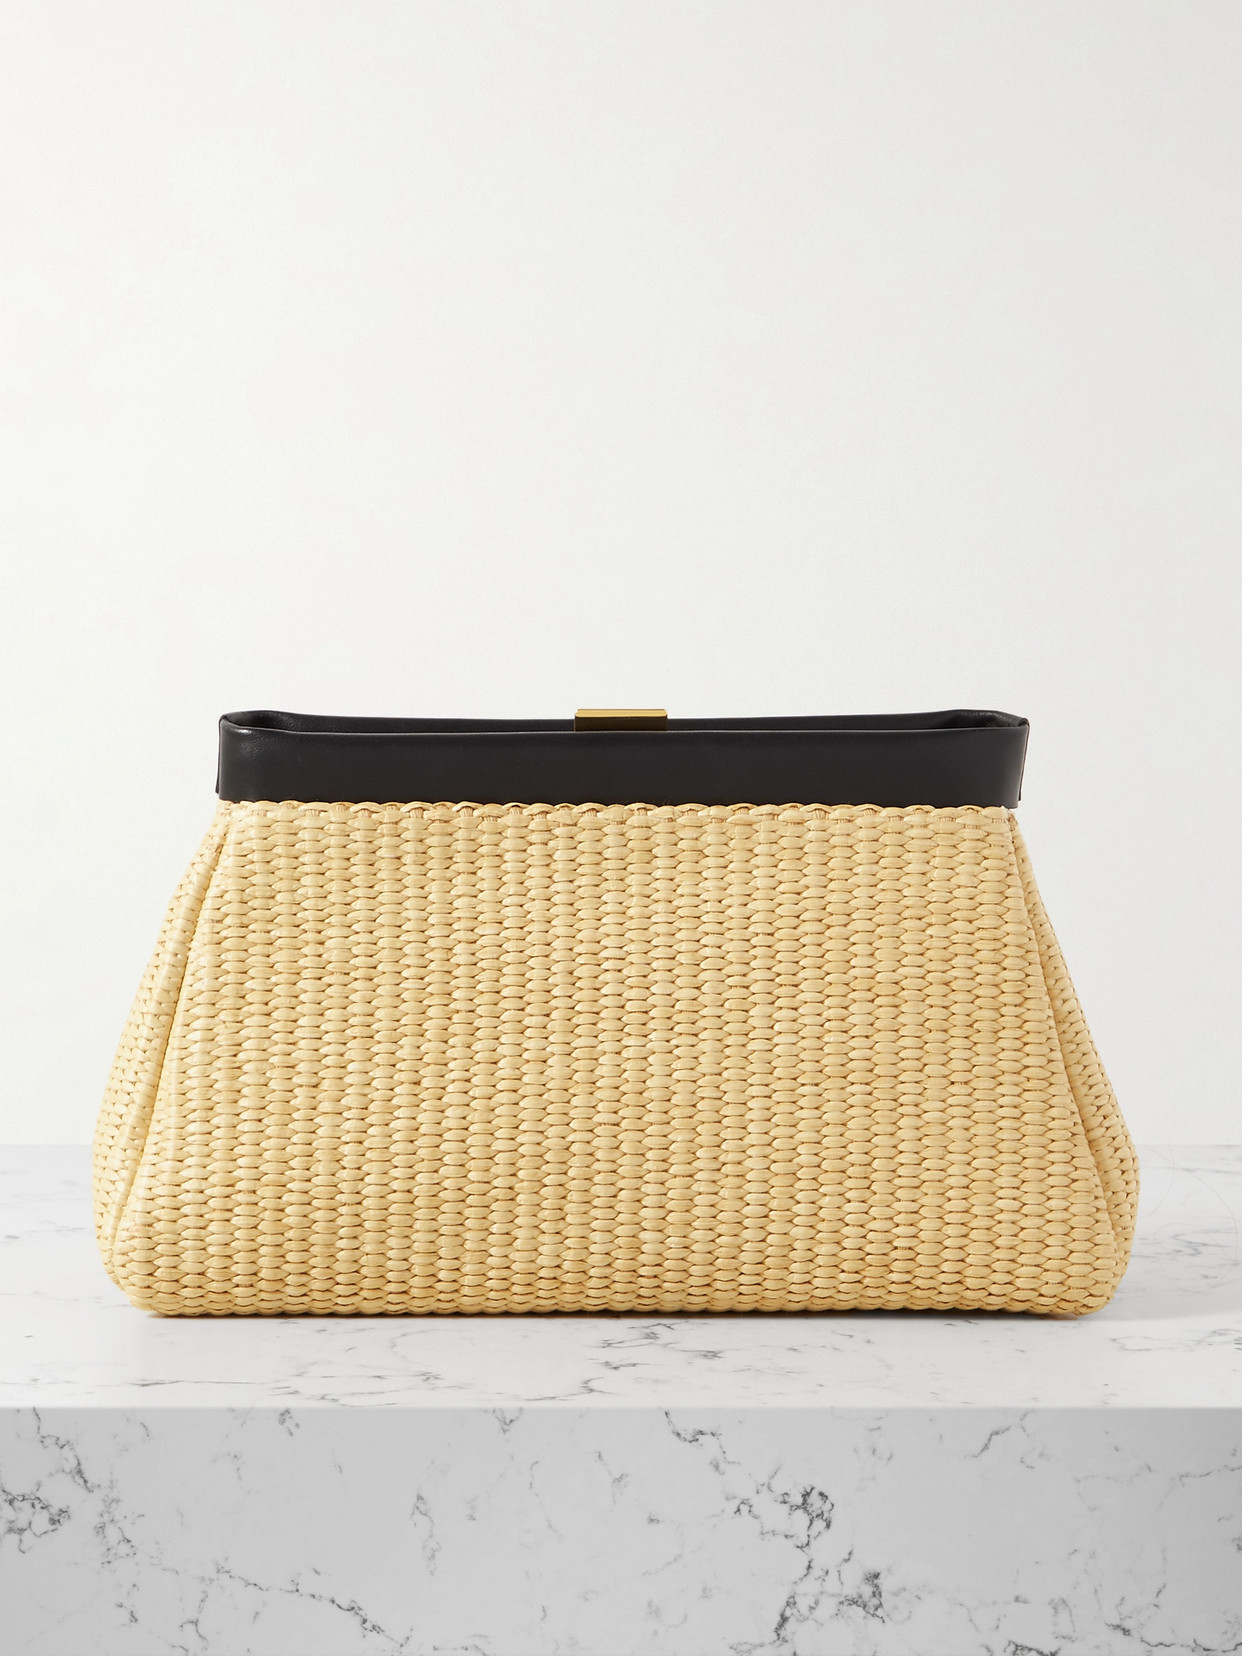 + Net Sustain Cannes Leather-Trimmed Raffia Clutch